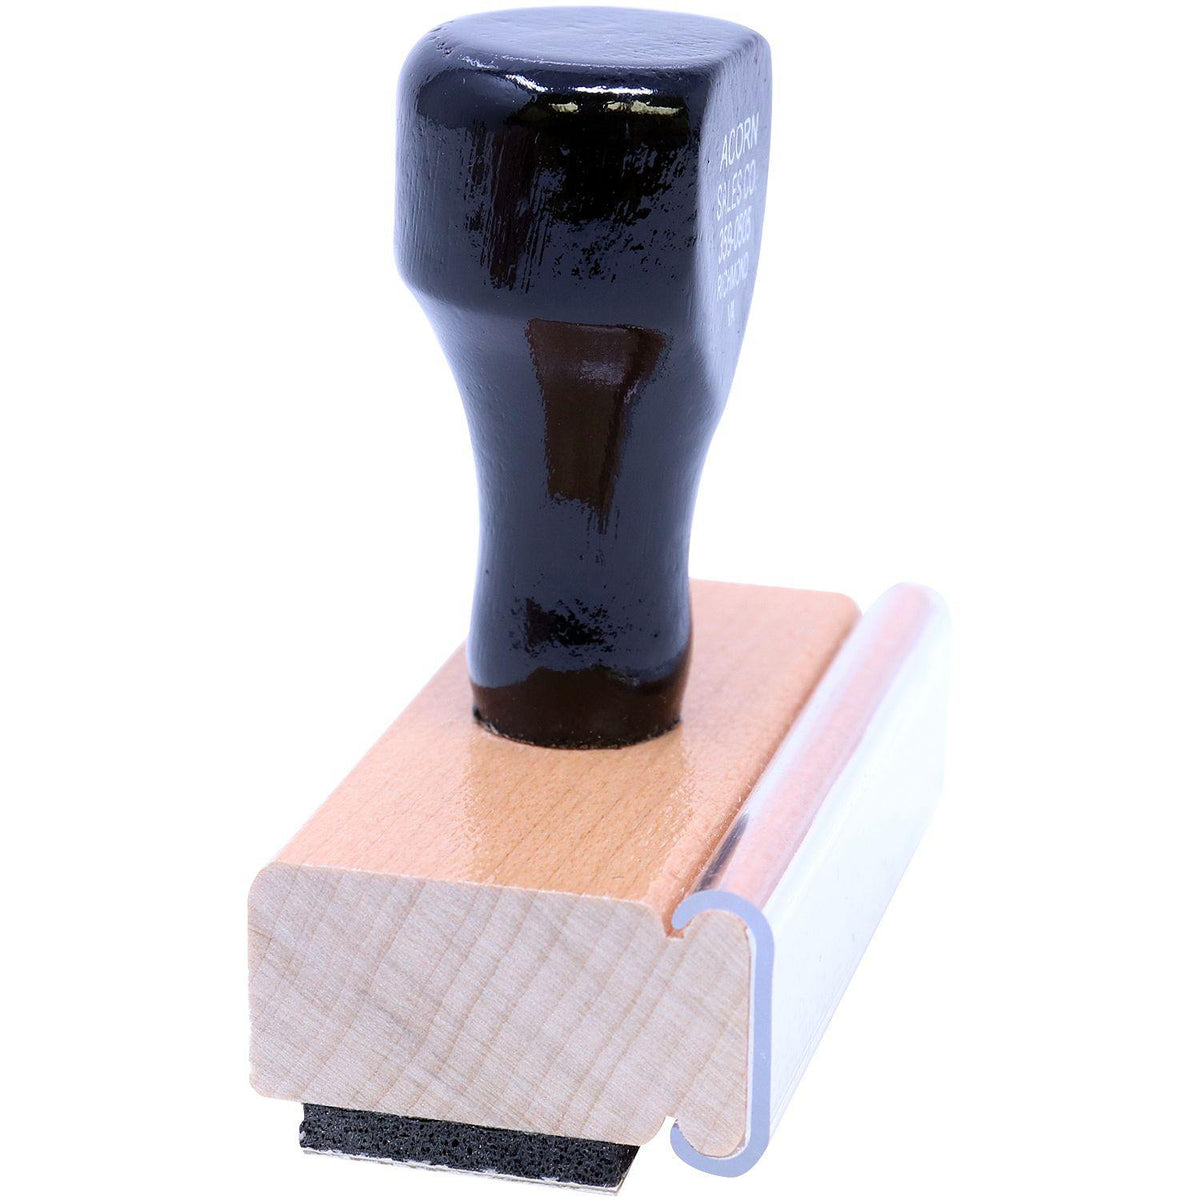 Side View of Large Original with Hand Rubber Stamp at an Angle